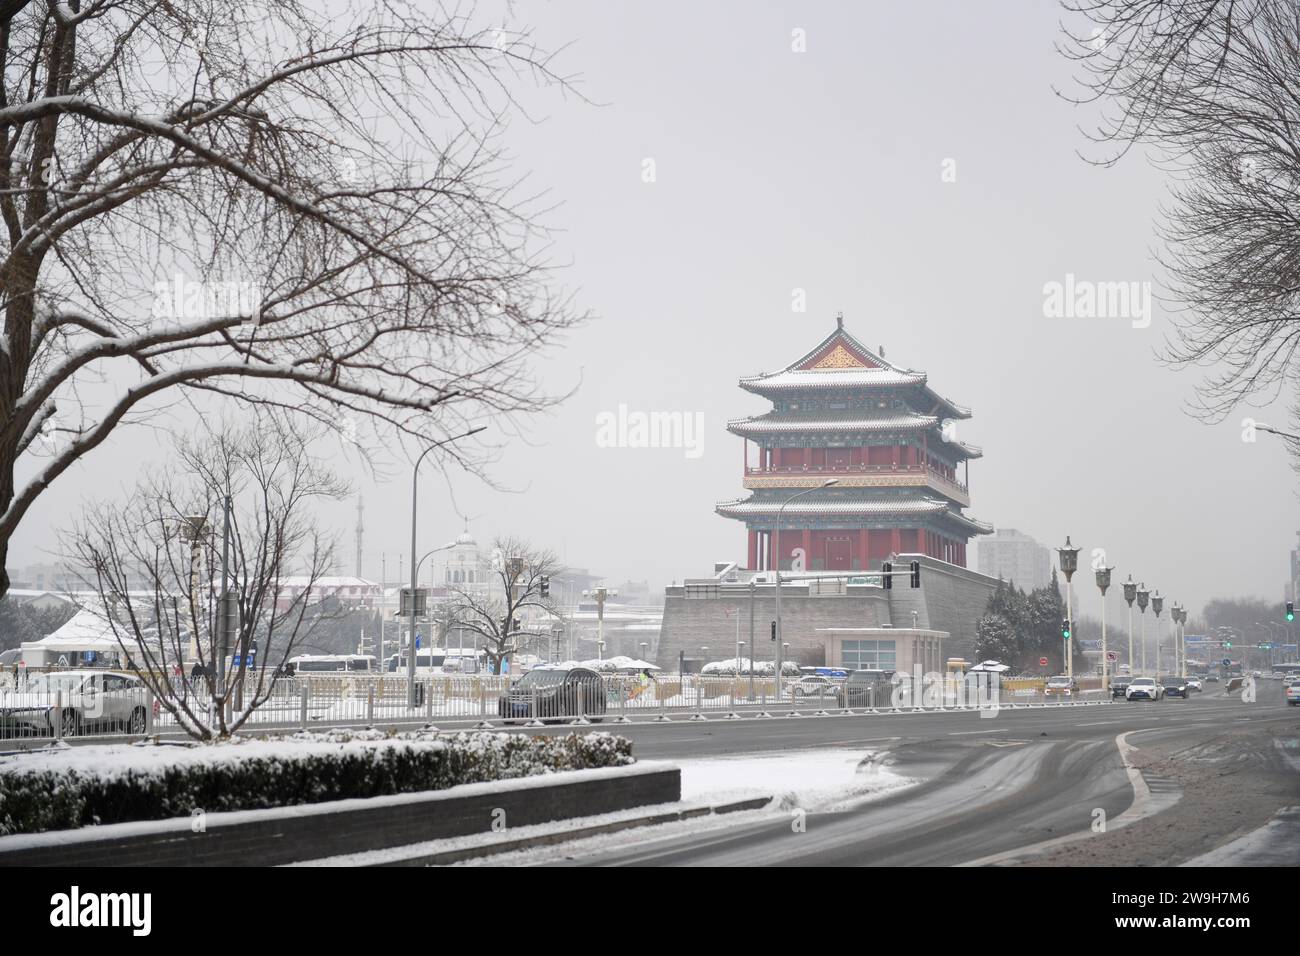 (231228) -- BEIJING, Dec. 28, 2023 (Xinhua) -- This photo taken on Dec. 14, 2023 shows the Zhengyang Gate in snowfall in Beijing, capital of China. First created in the Yuan Dynasty (1271-1368), the Beijing Central Axis, or Zhongzhouxian, stretches 7.8 kilometers between the Yongding Gate in the south of the city and the Drum Tower and Bell Tower in the north. Most of the major old-city buildings of Beijing sit along this axis. Gates, palaces, temples, squares and gardens of the old city are all linked up to the axis. As they witnessed the folk activities along the line from old days to new Stock Photo